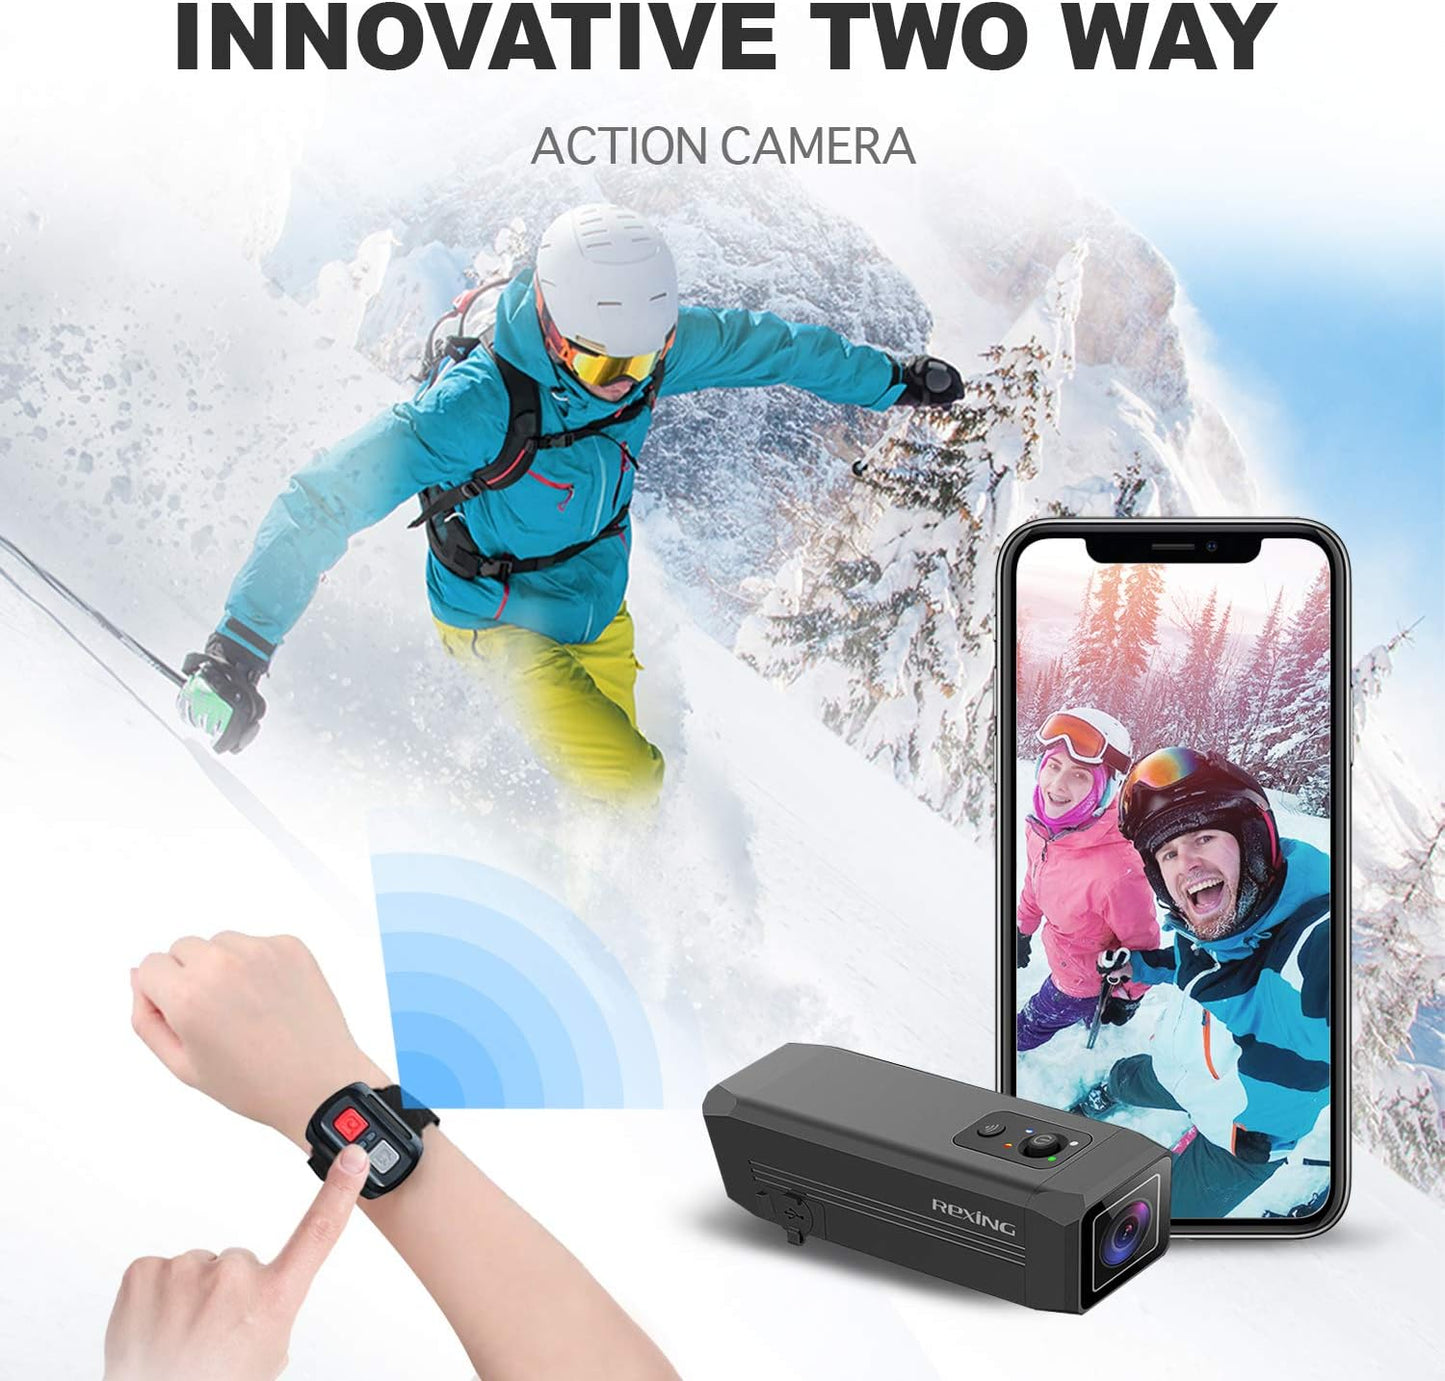 RexingUSA A1 Two-Way Action Camera 1080p@30fps, Wi-Fi Connectivity, Broad View, Wrist Remote Control, IMX307 Sensor, Water-Resistant, Extreme Sports Camcorder for Motorcycles, Bicycles, Hiking,